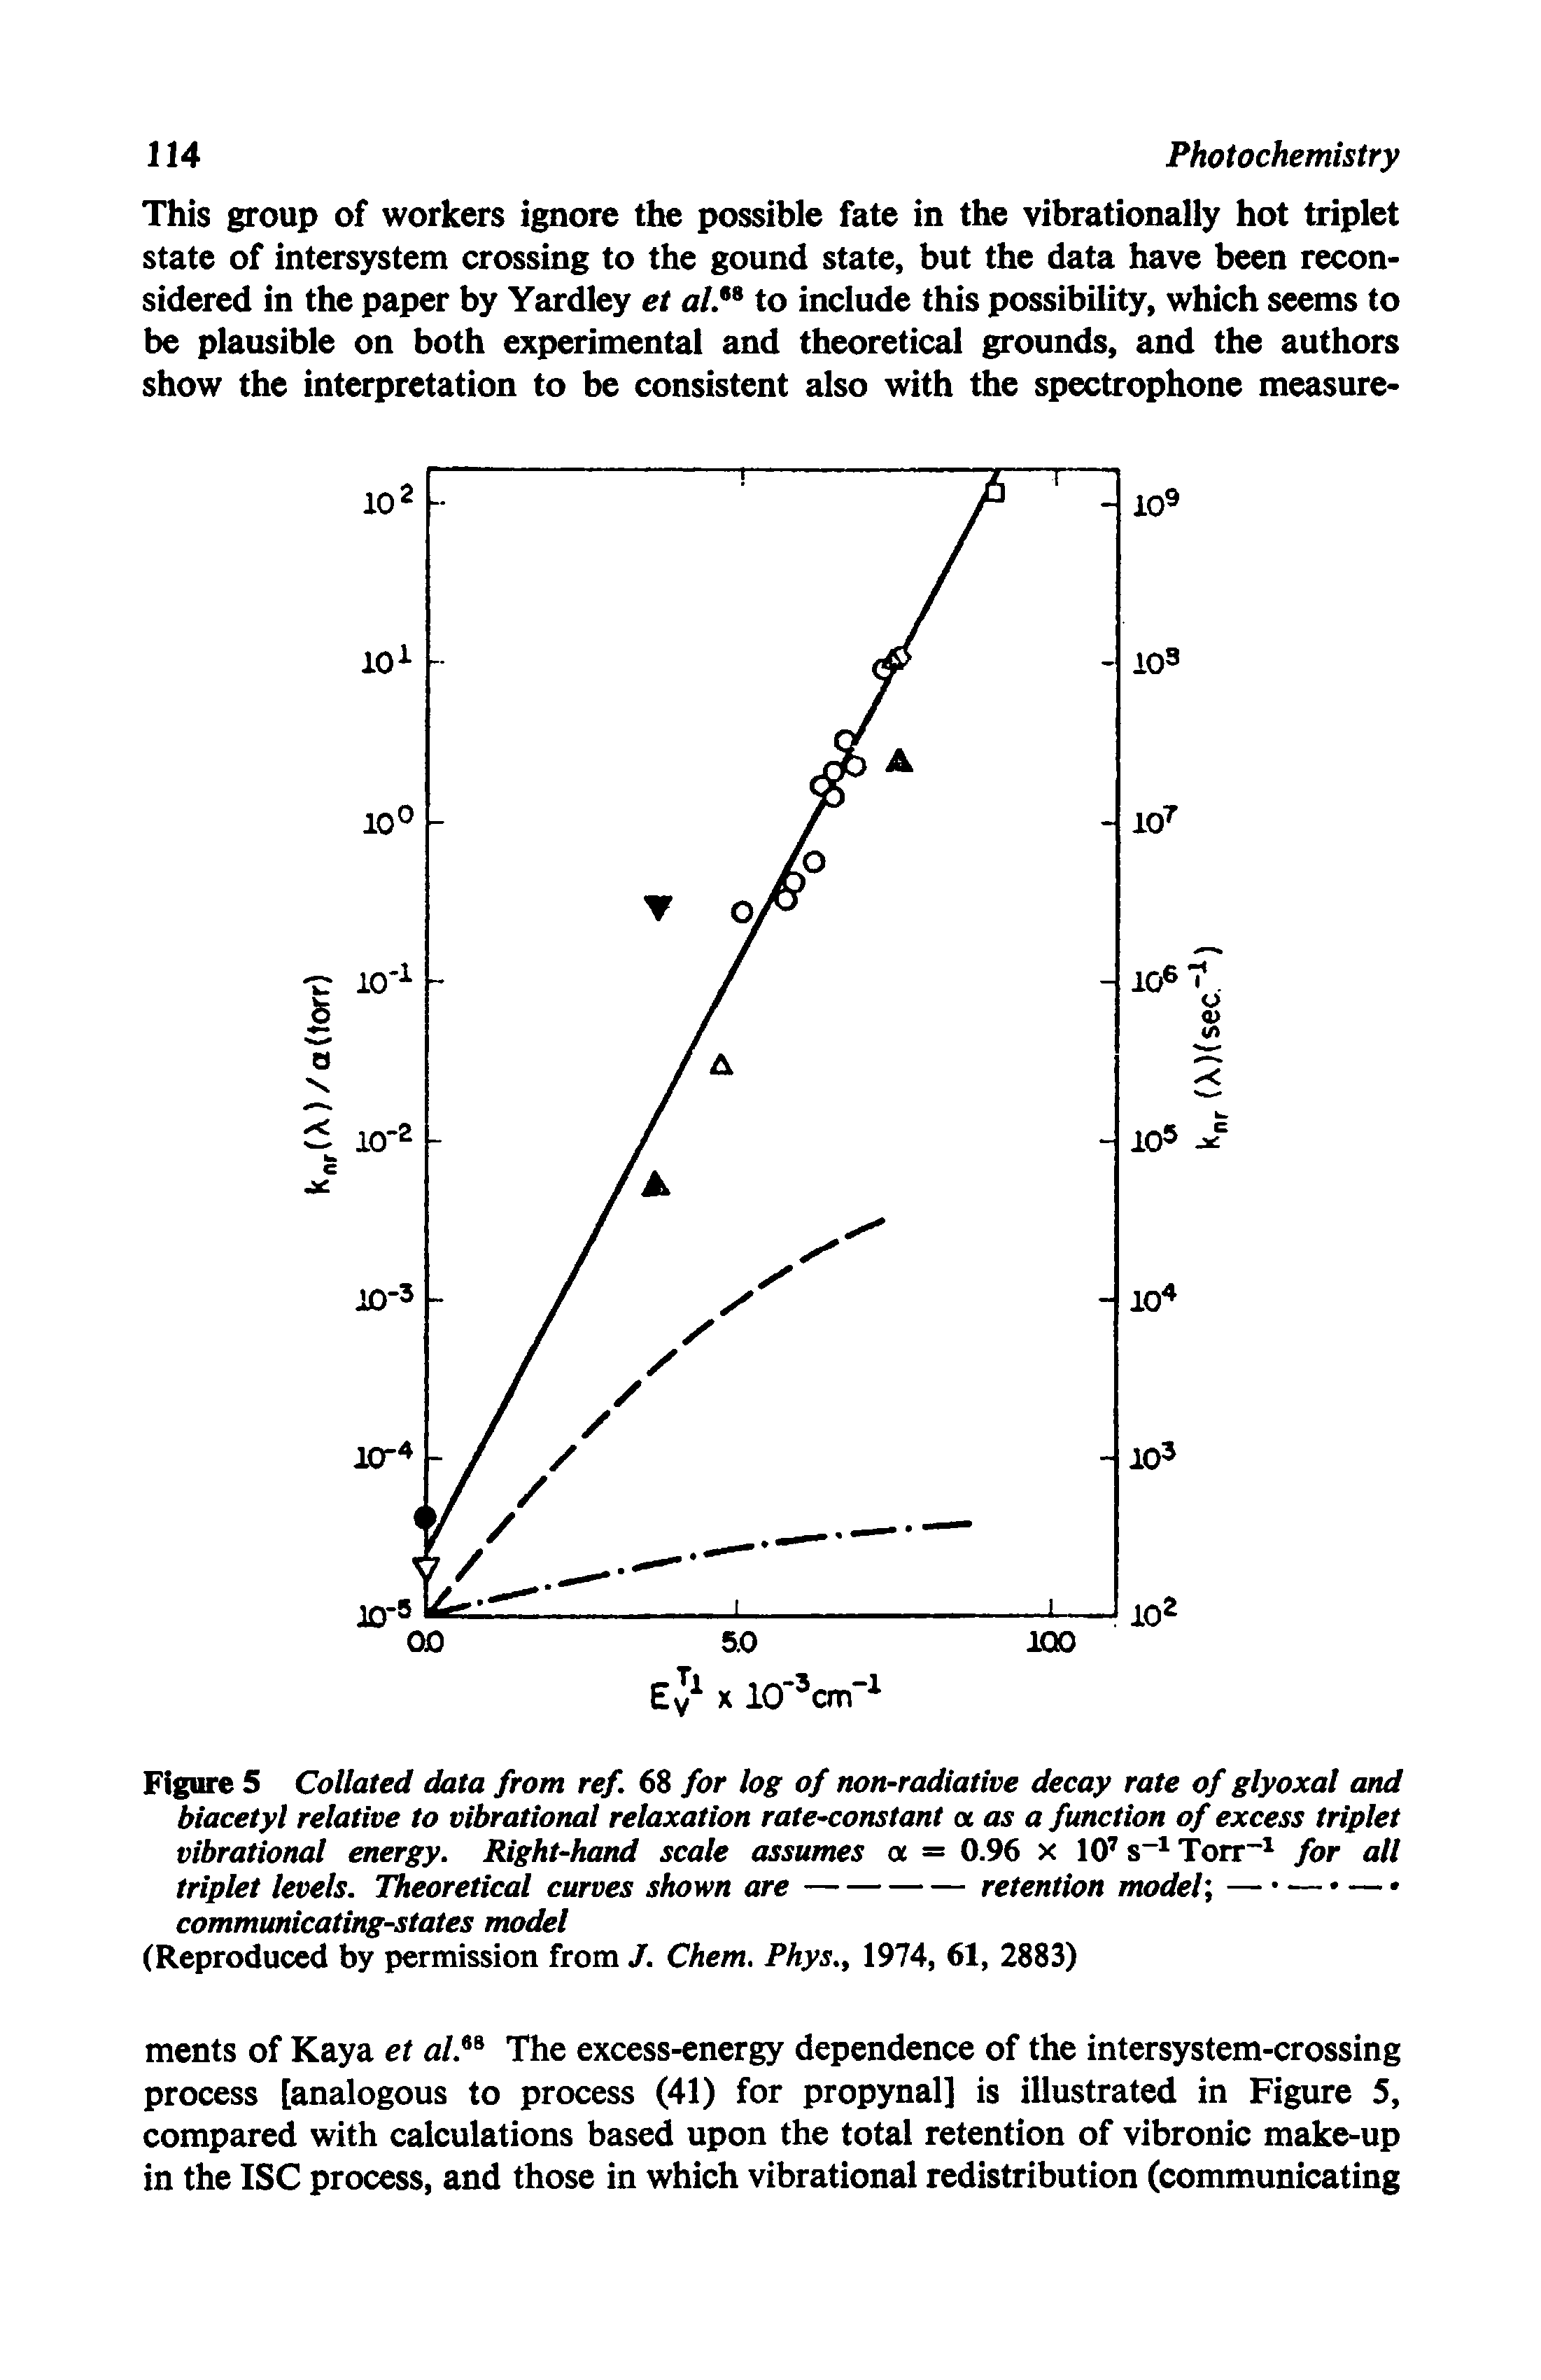 Figure 5 Collated data from ref. 68 for log of -radiative decay rate of glyoxal and biacetyl relative to vibrational relaxation rate-constant a. as a function of excess triplet vibrational energy. Right-hand scale assumes a. = 0.96 x 107 s-1 Torr-1 for all...